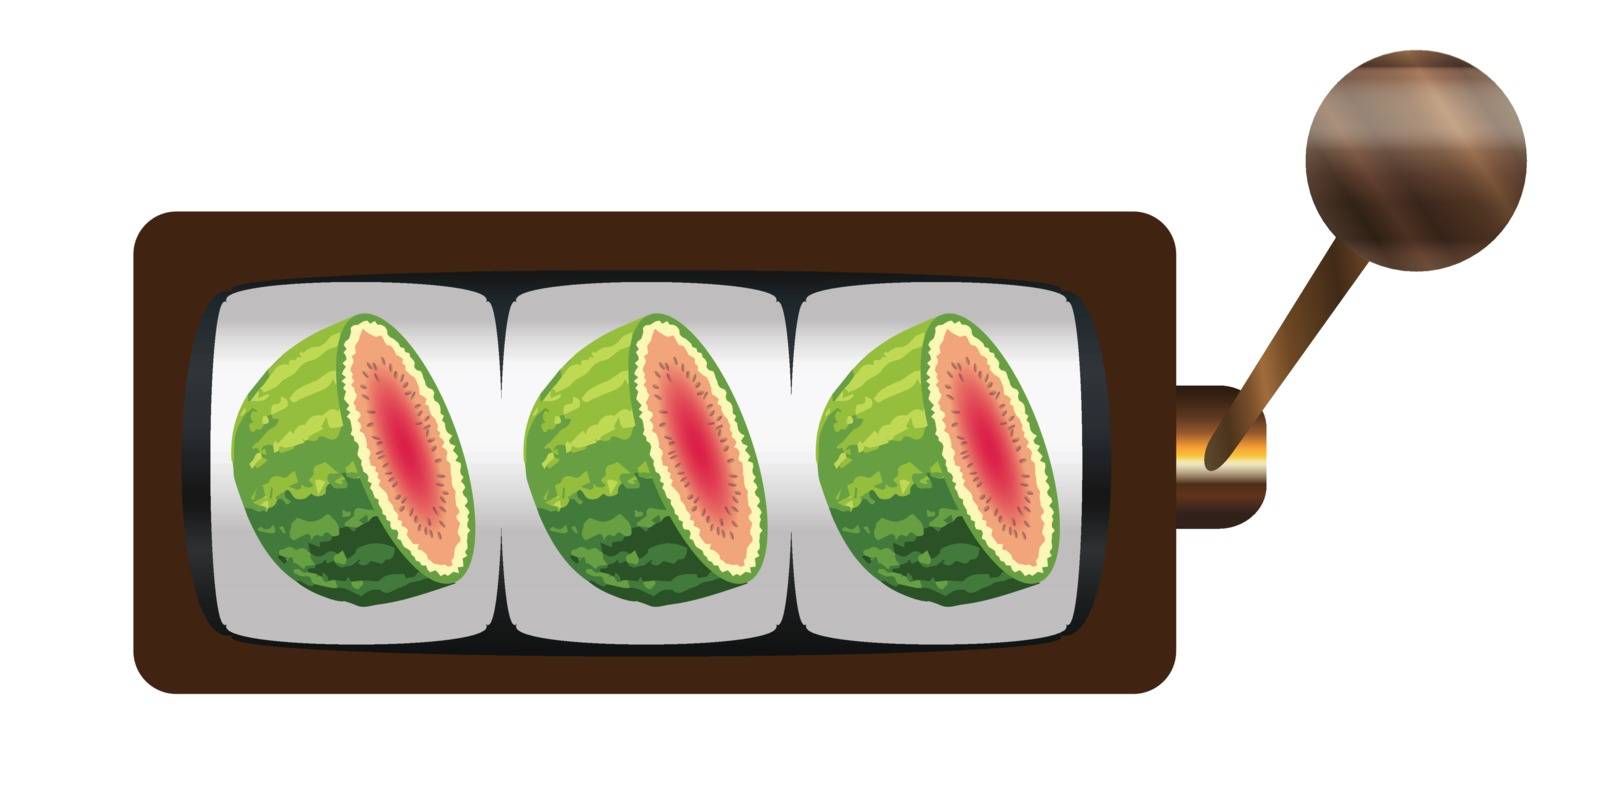 Fruit Machine 3 Melons or Cantaloupe With Handle And Knob by Bigalbaloo